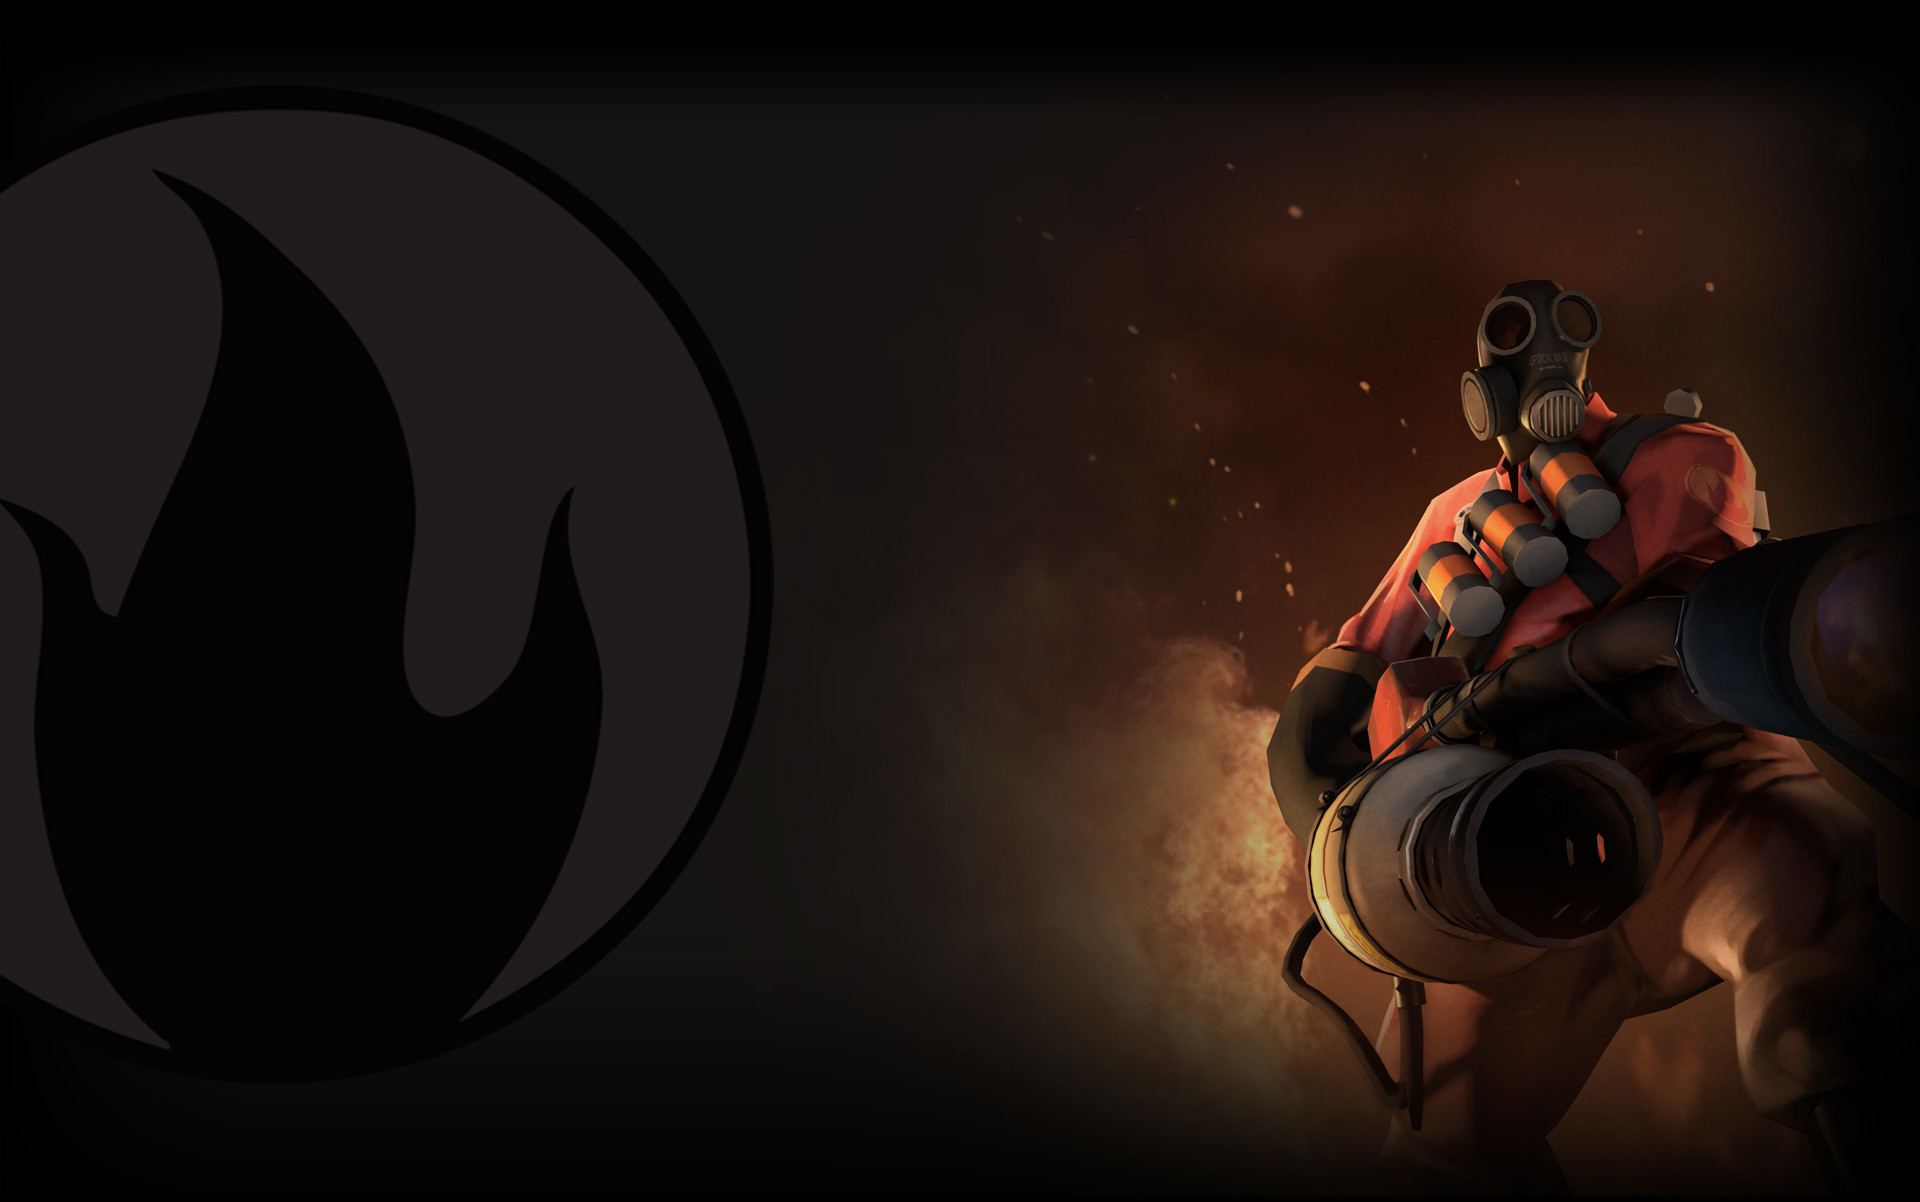 1920x1202 Team Fortress 2 Profile Background. View Full Size